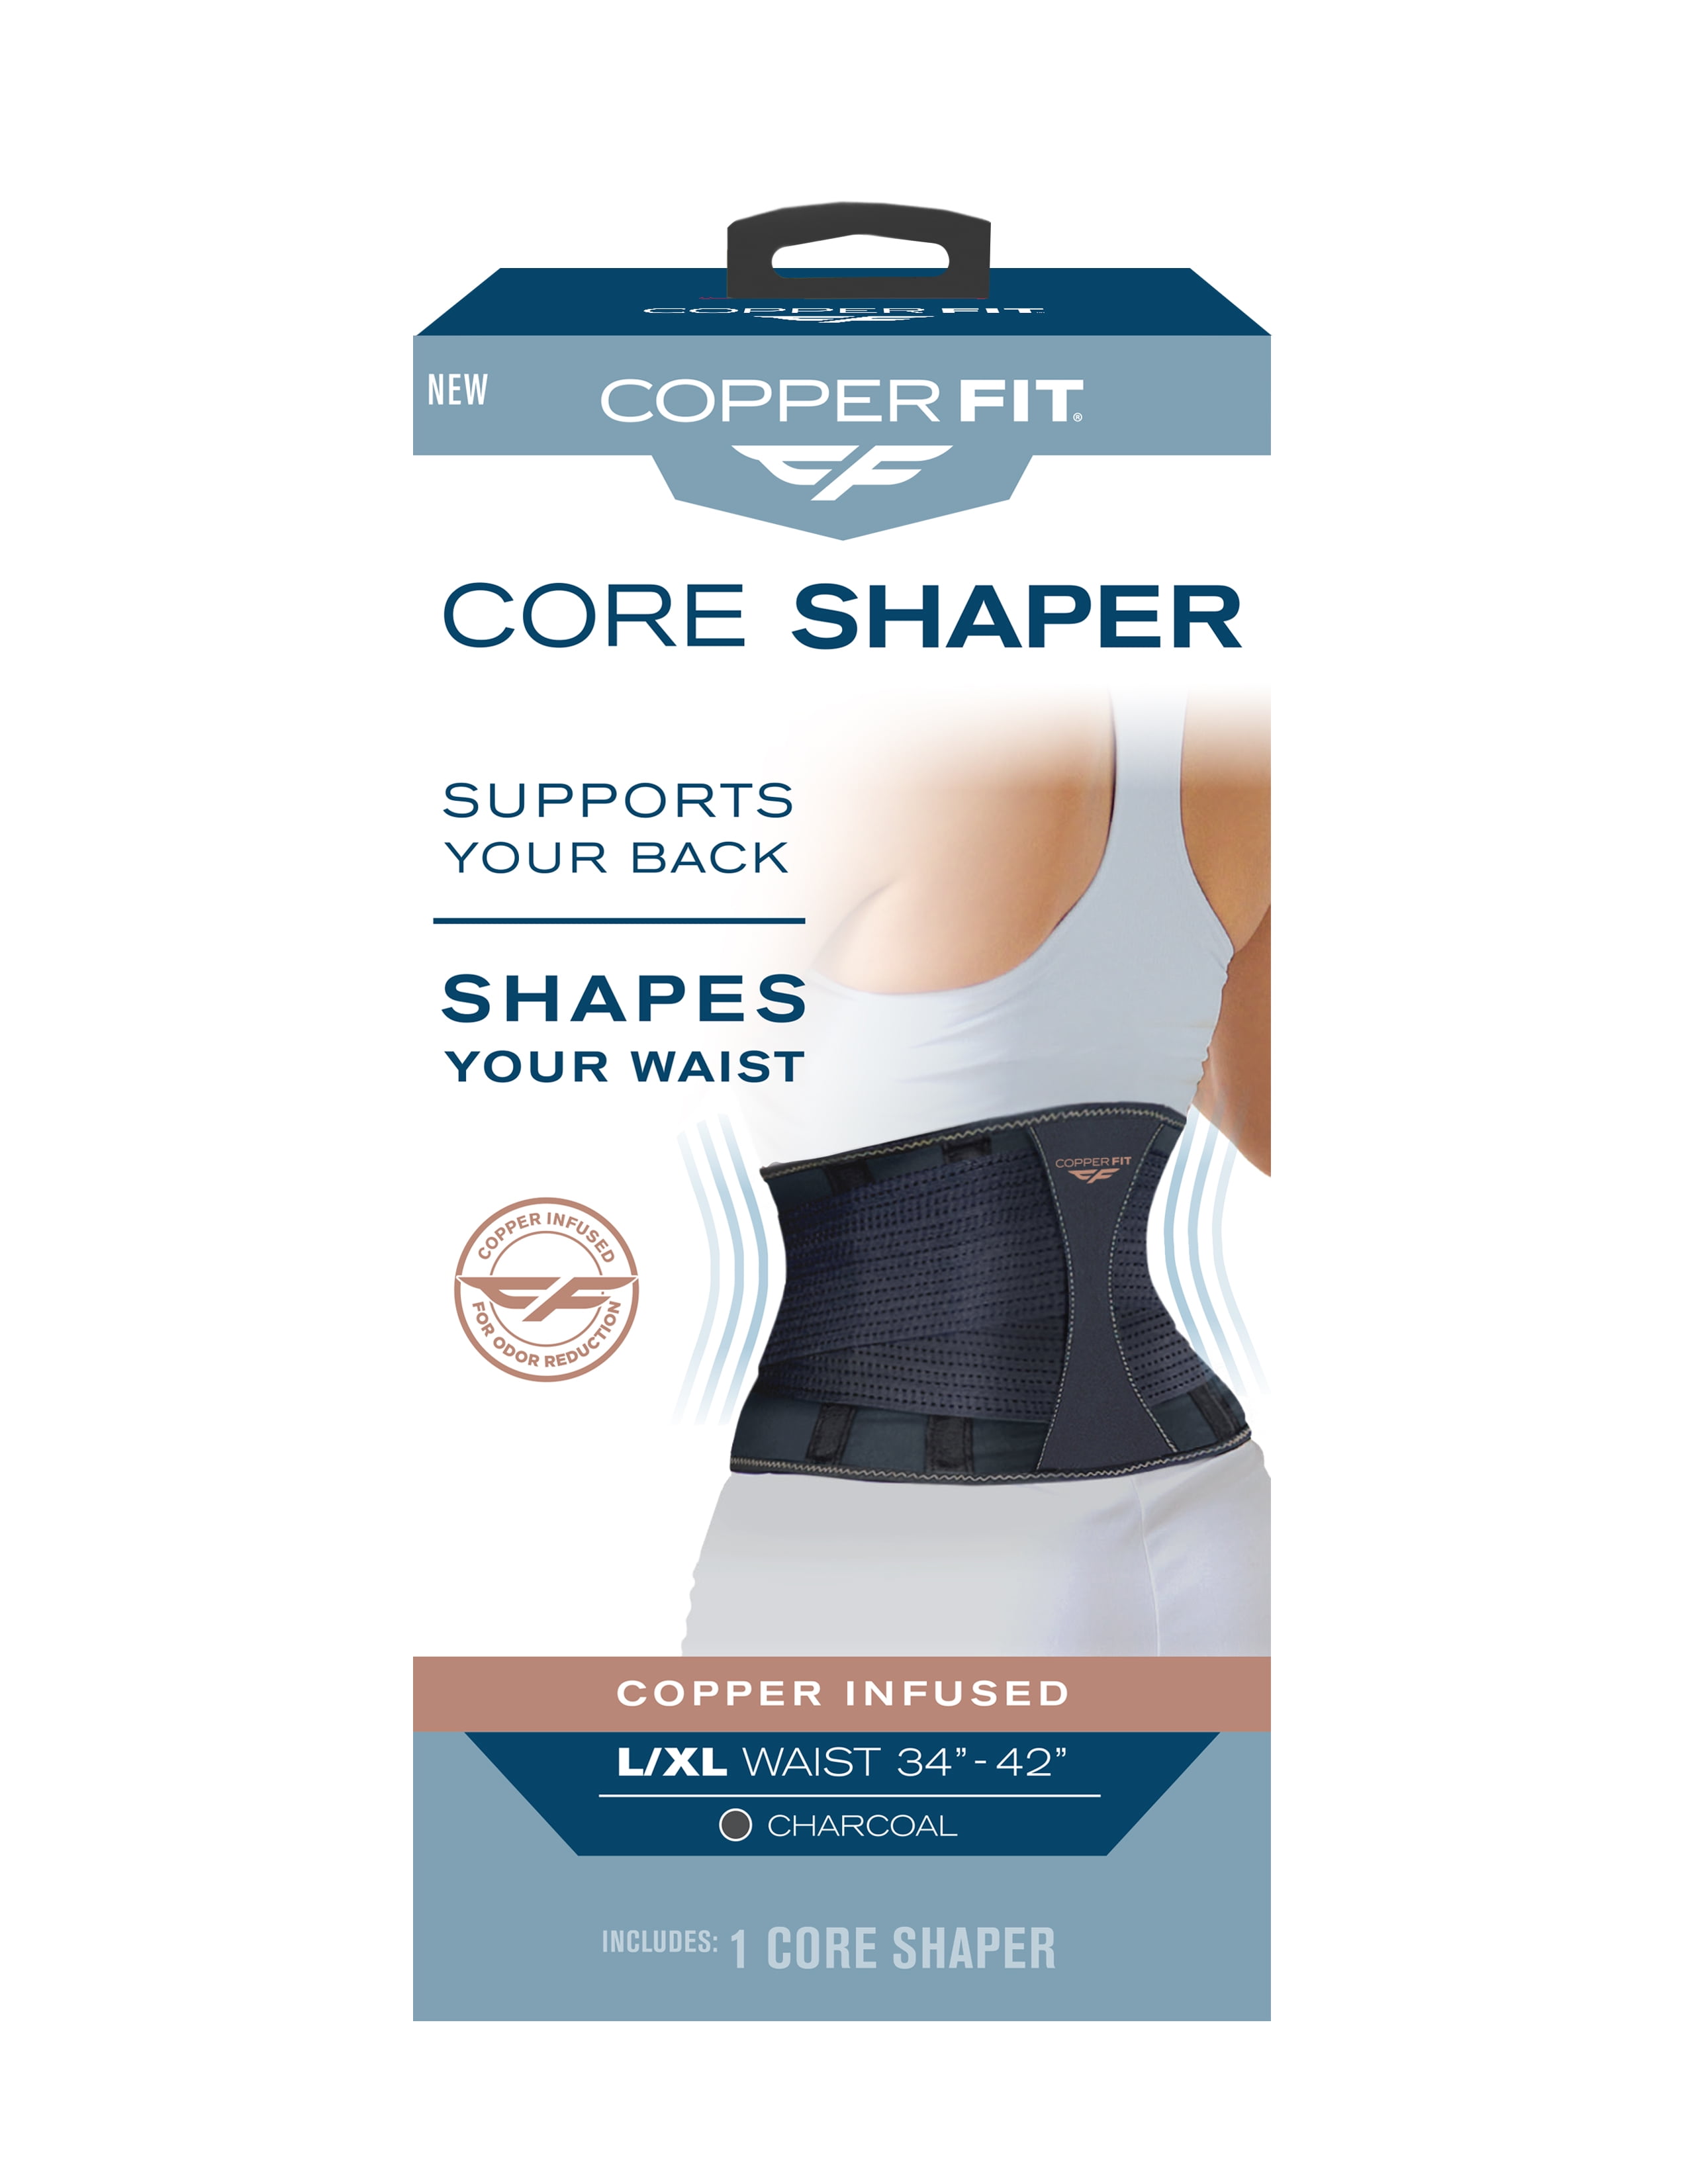 Copper Fit® Core Shaper, Supports Back and Shapes Waist, Copper Infused,  Charcoal Gray, Large/XL